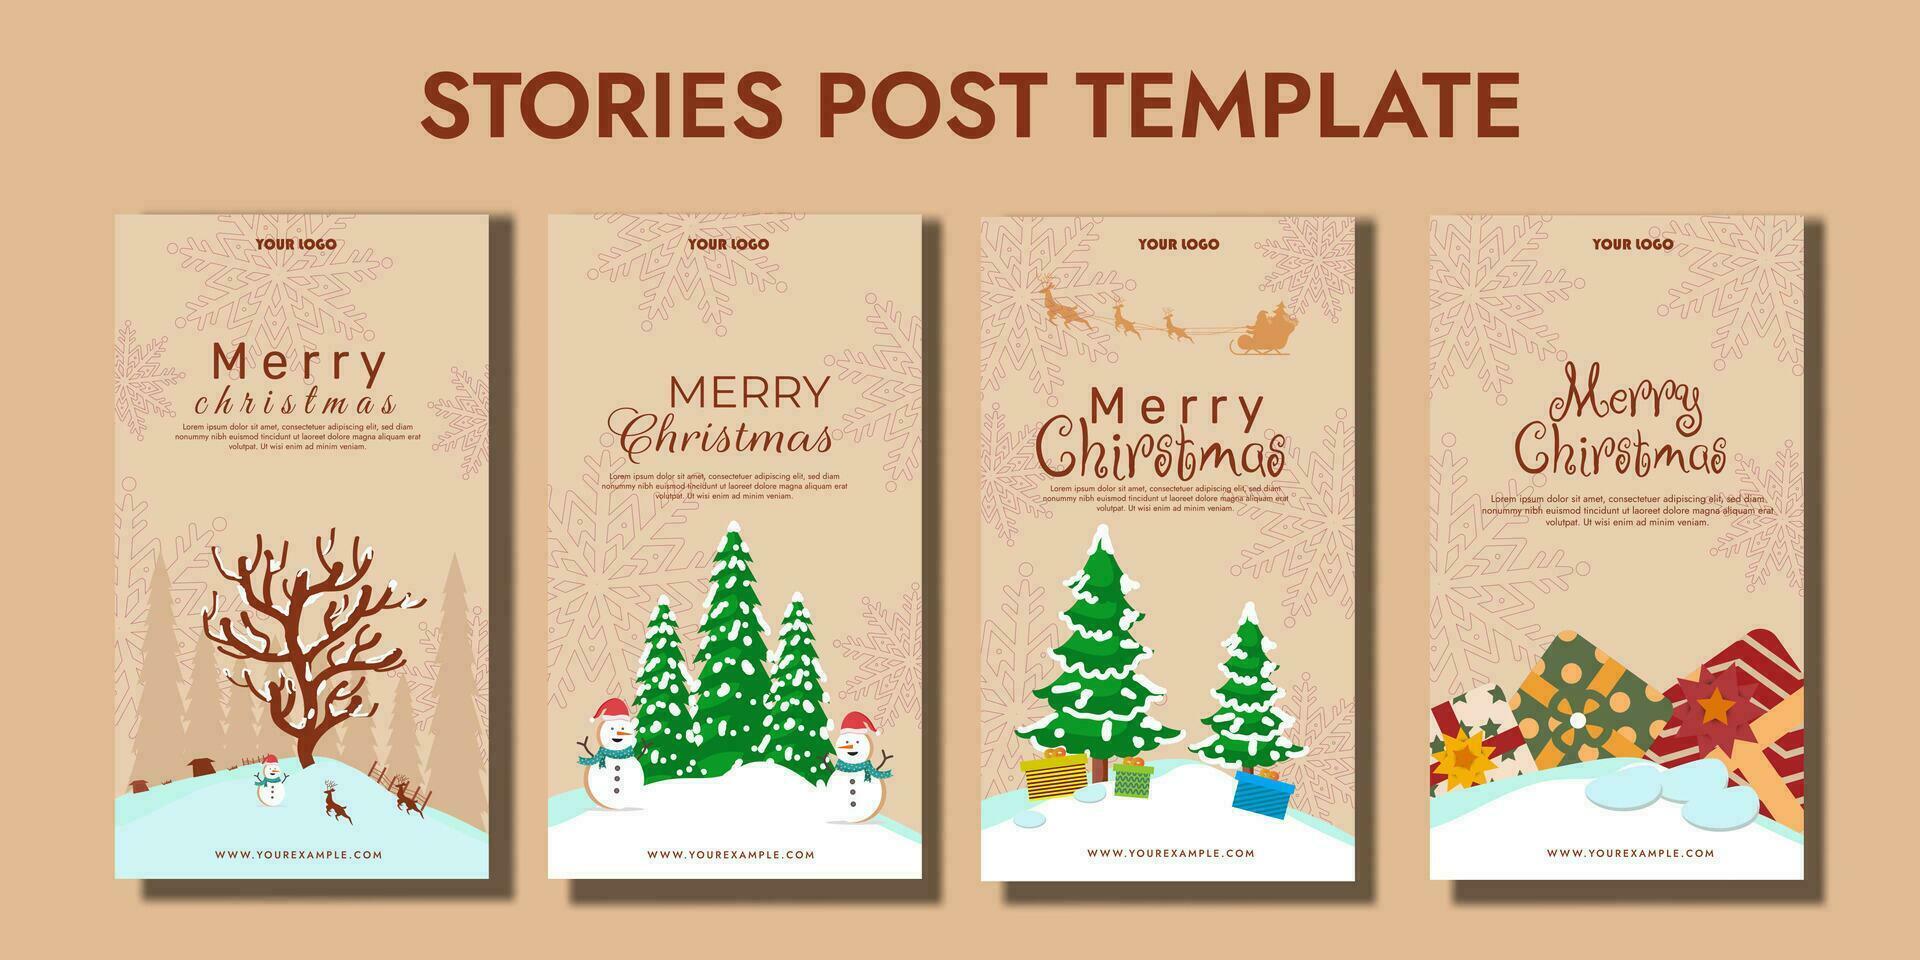 stories collection for christmas editable template, greeting card stories template, portrait Christmas background, editable Christmas portrait greeting card vector